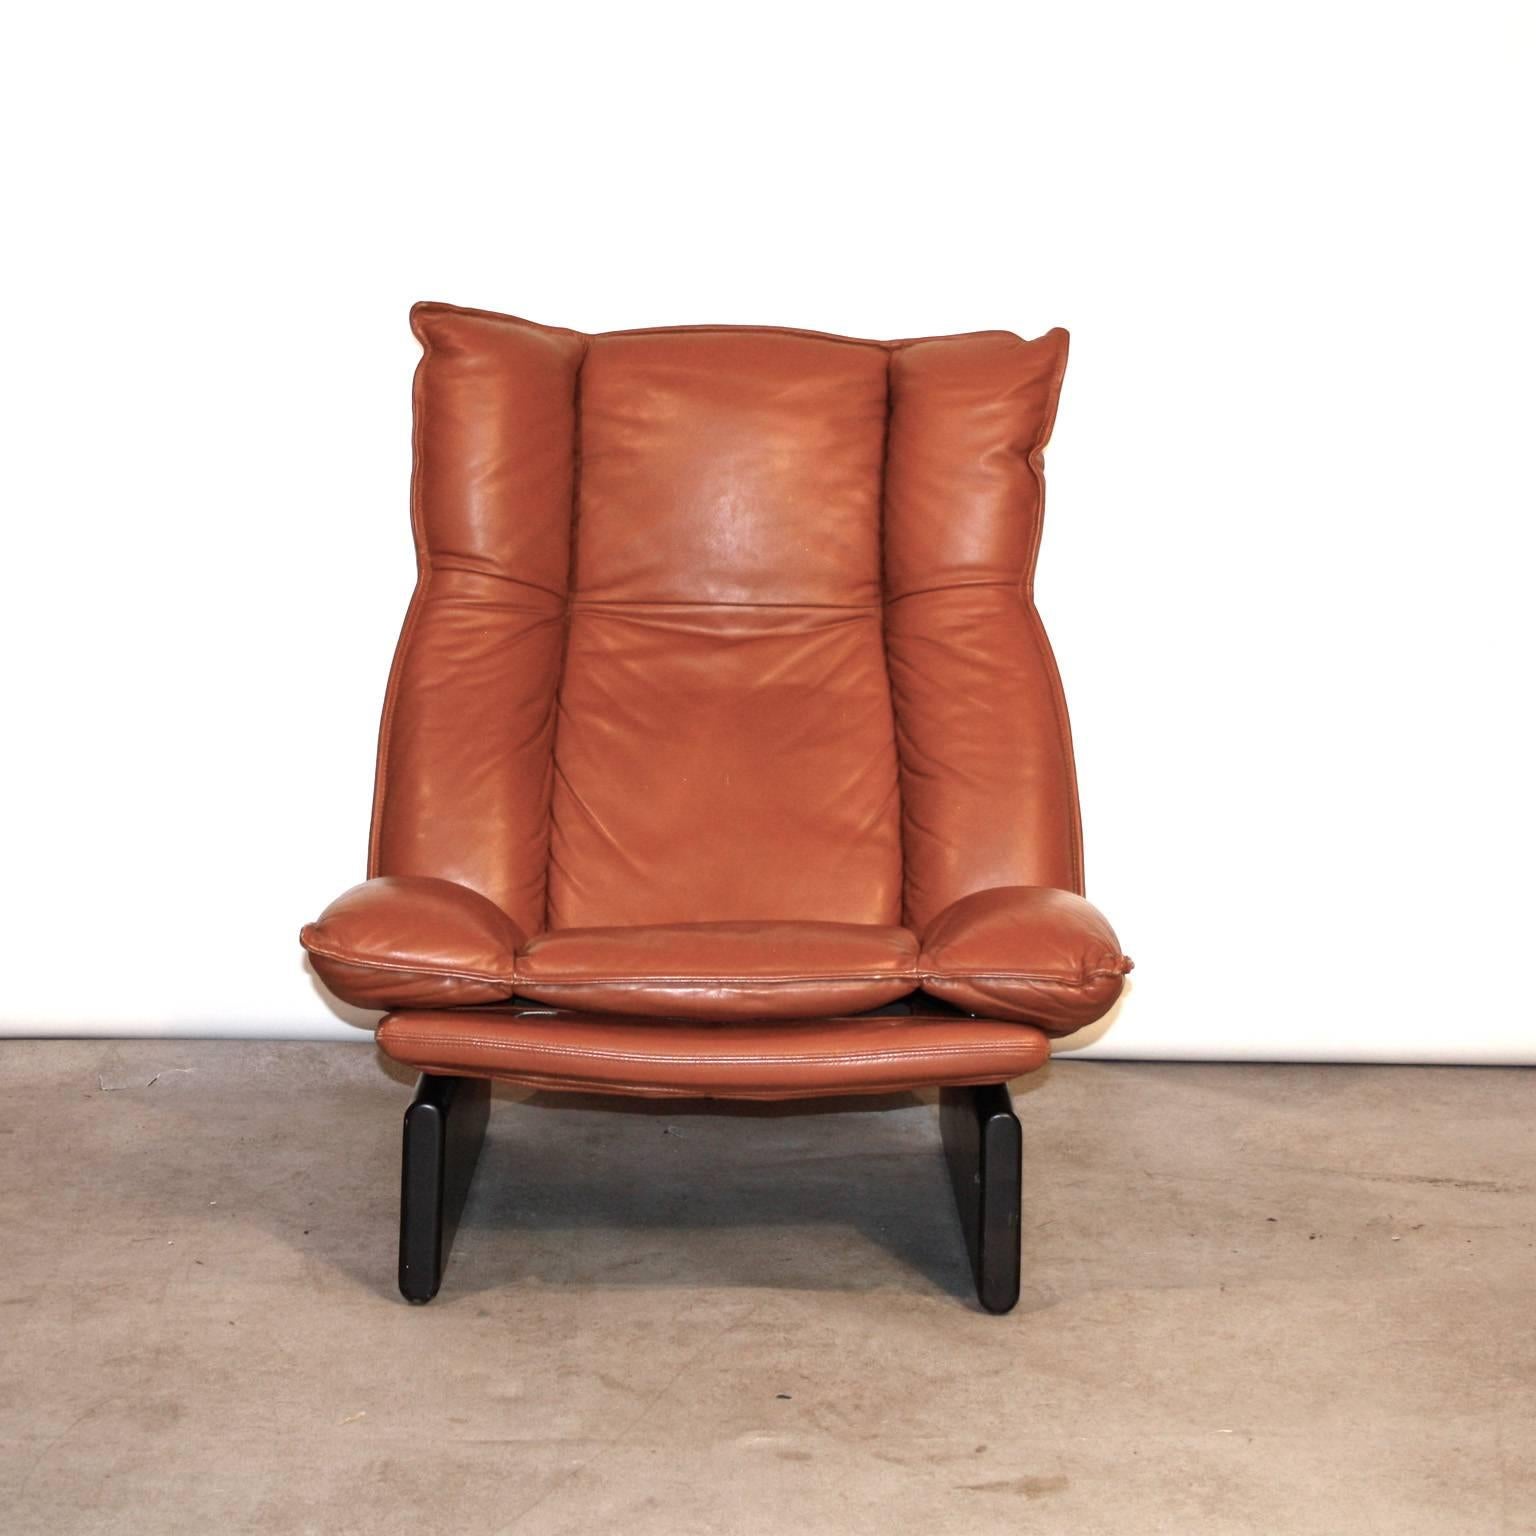 Lounge chair in leather from the 1970s by the Dutch manufacturer Leolux. With a solid wooden base. Good condition with a tiny barely visible repair to the lower side.